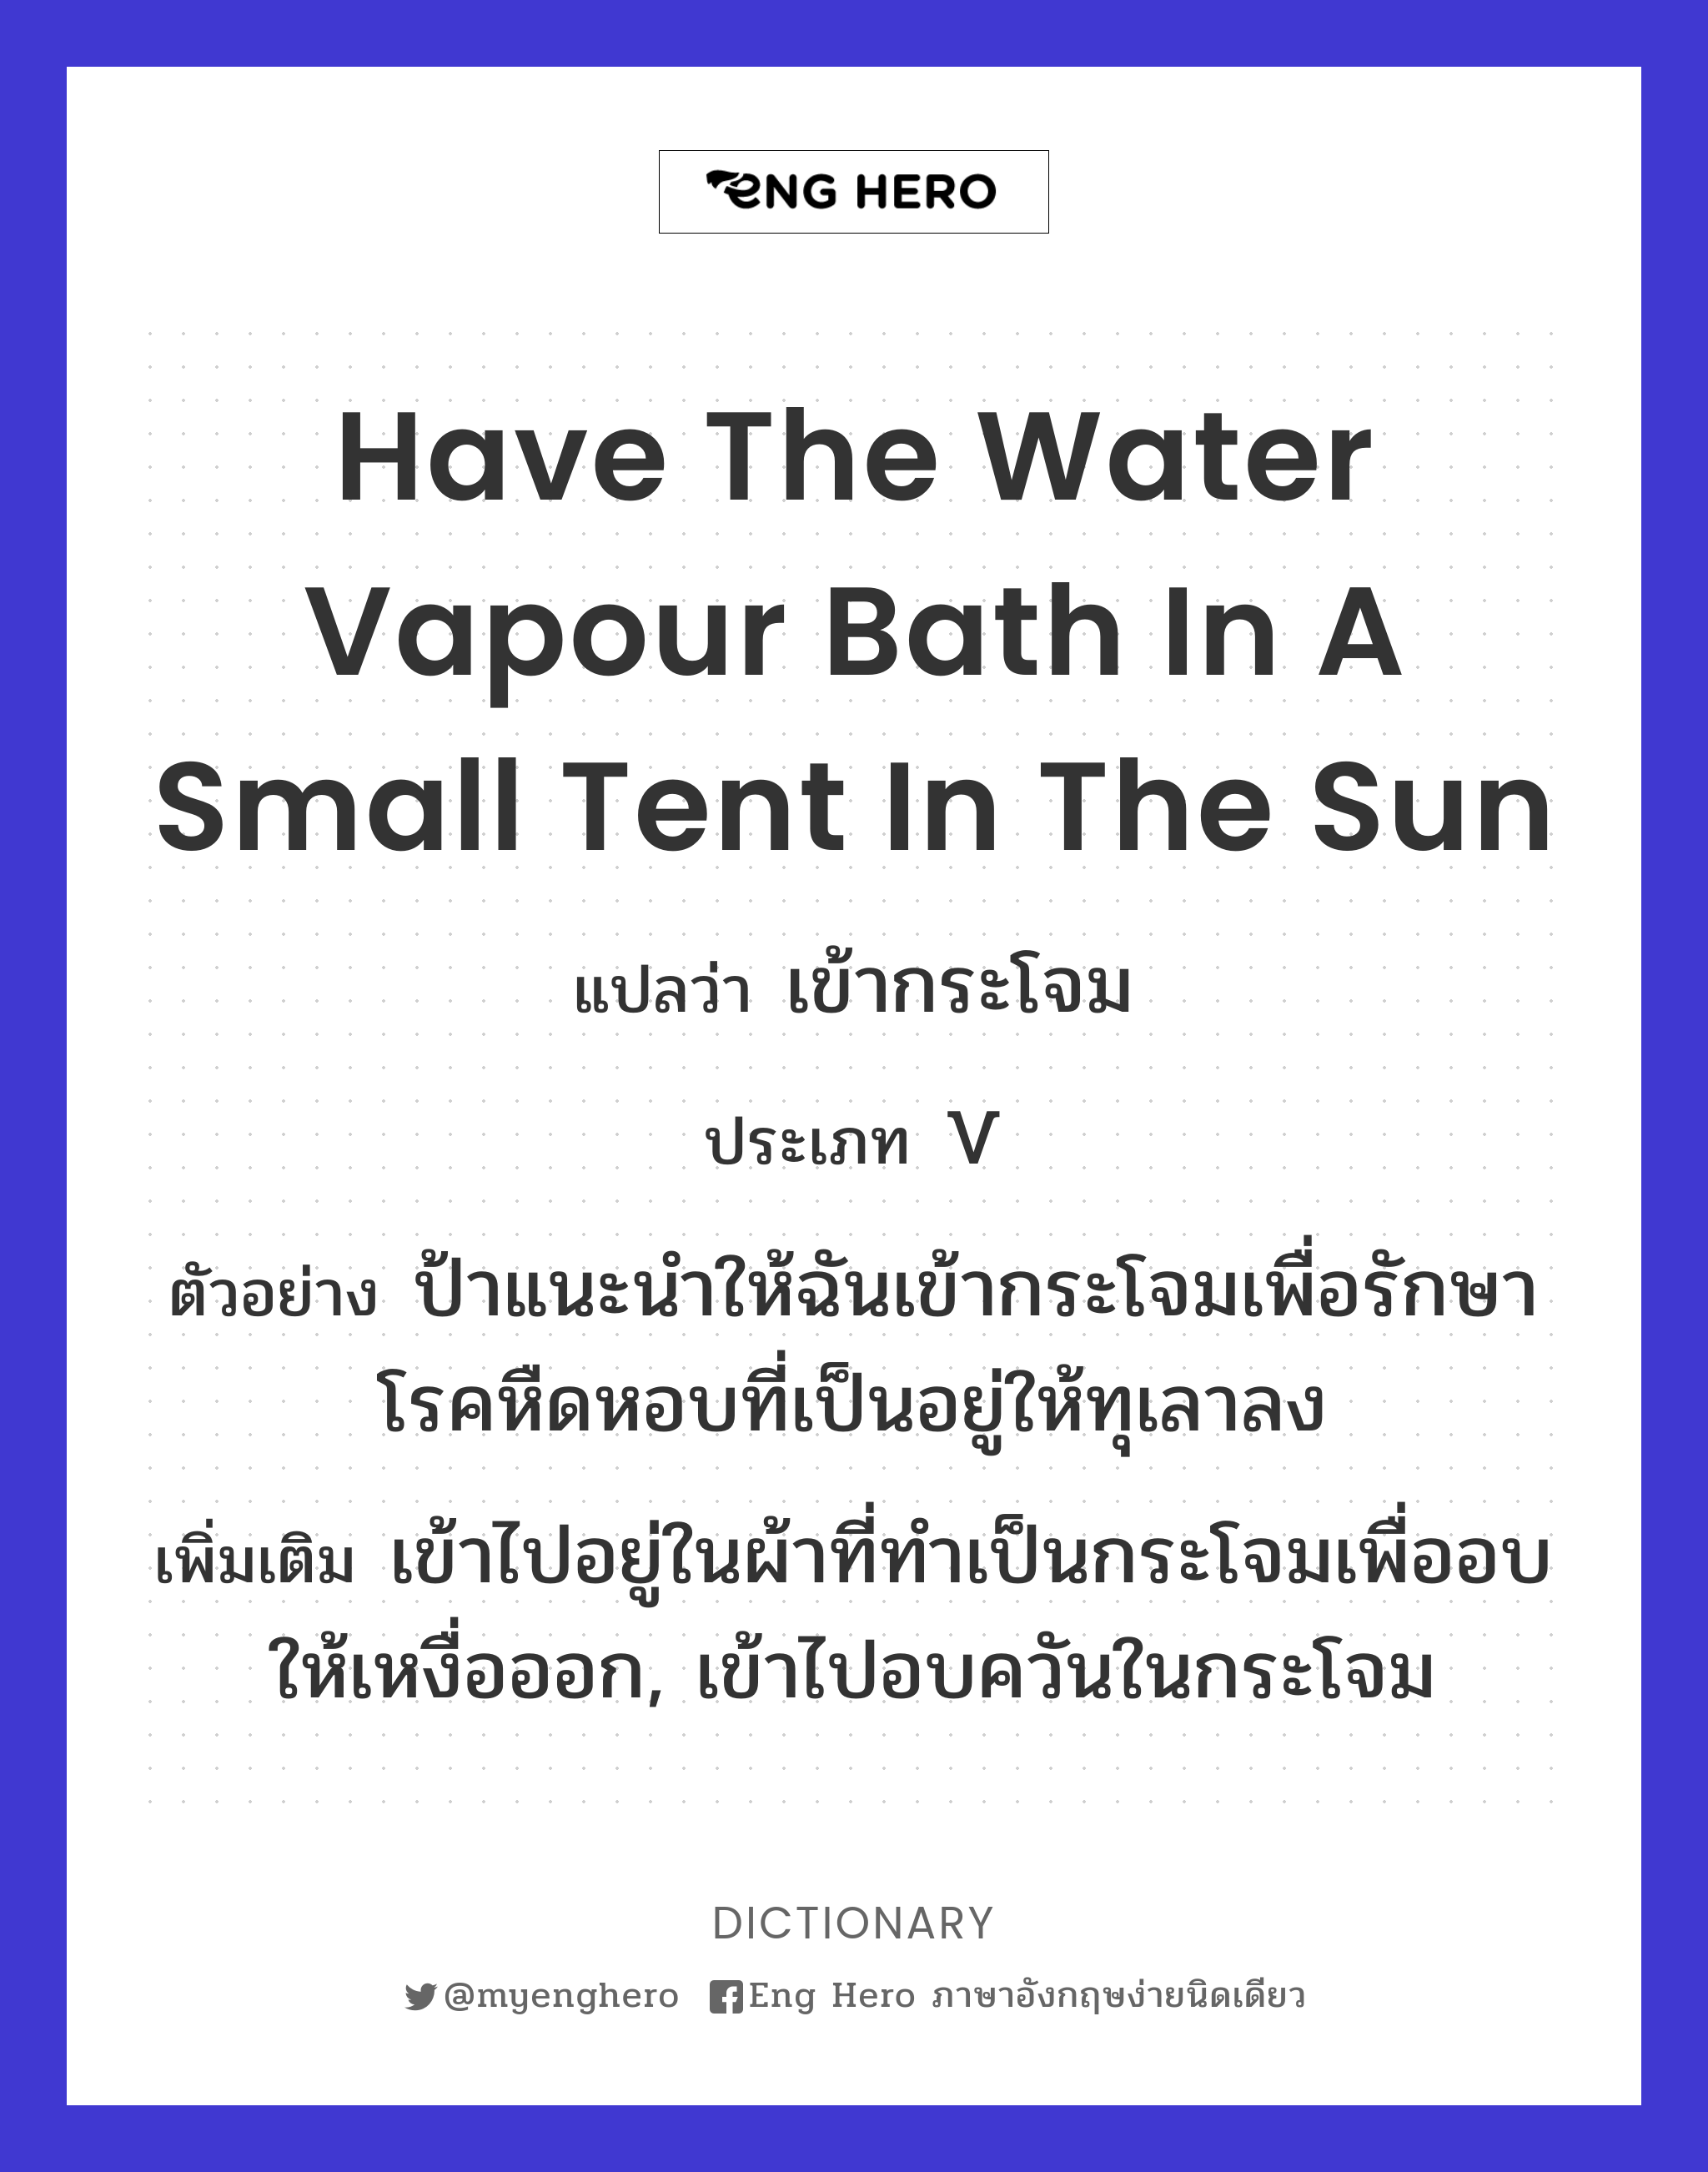 have the water vapour bath in a small tent in the sun